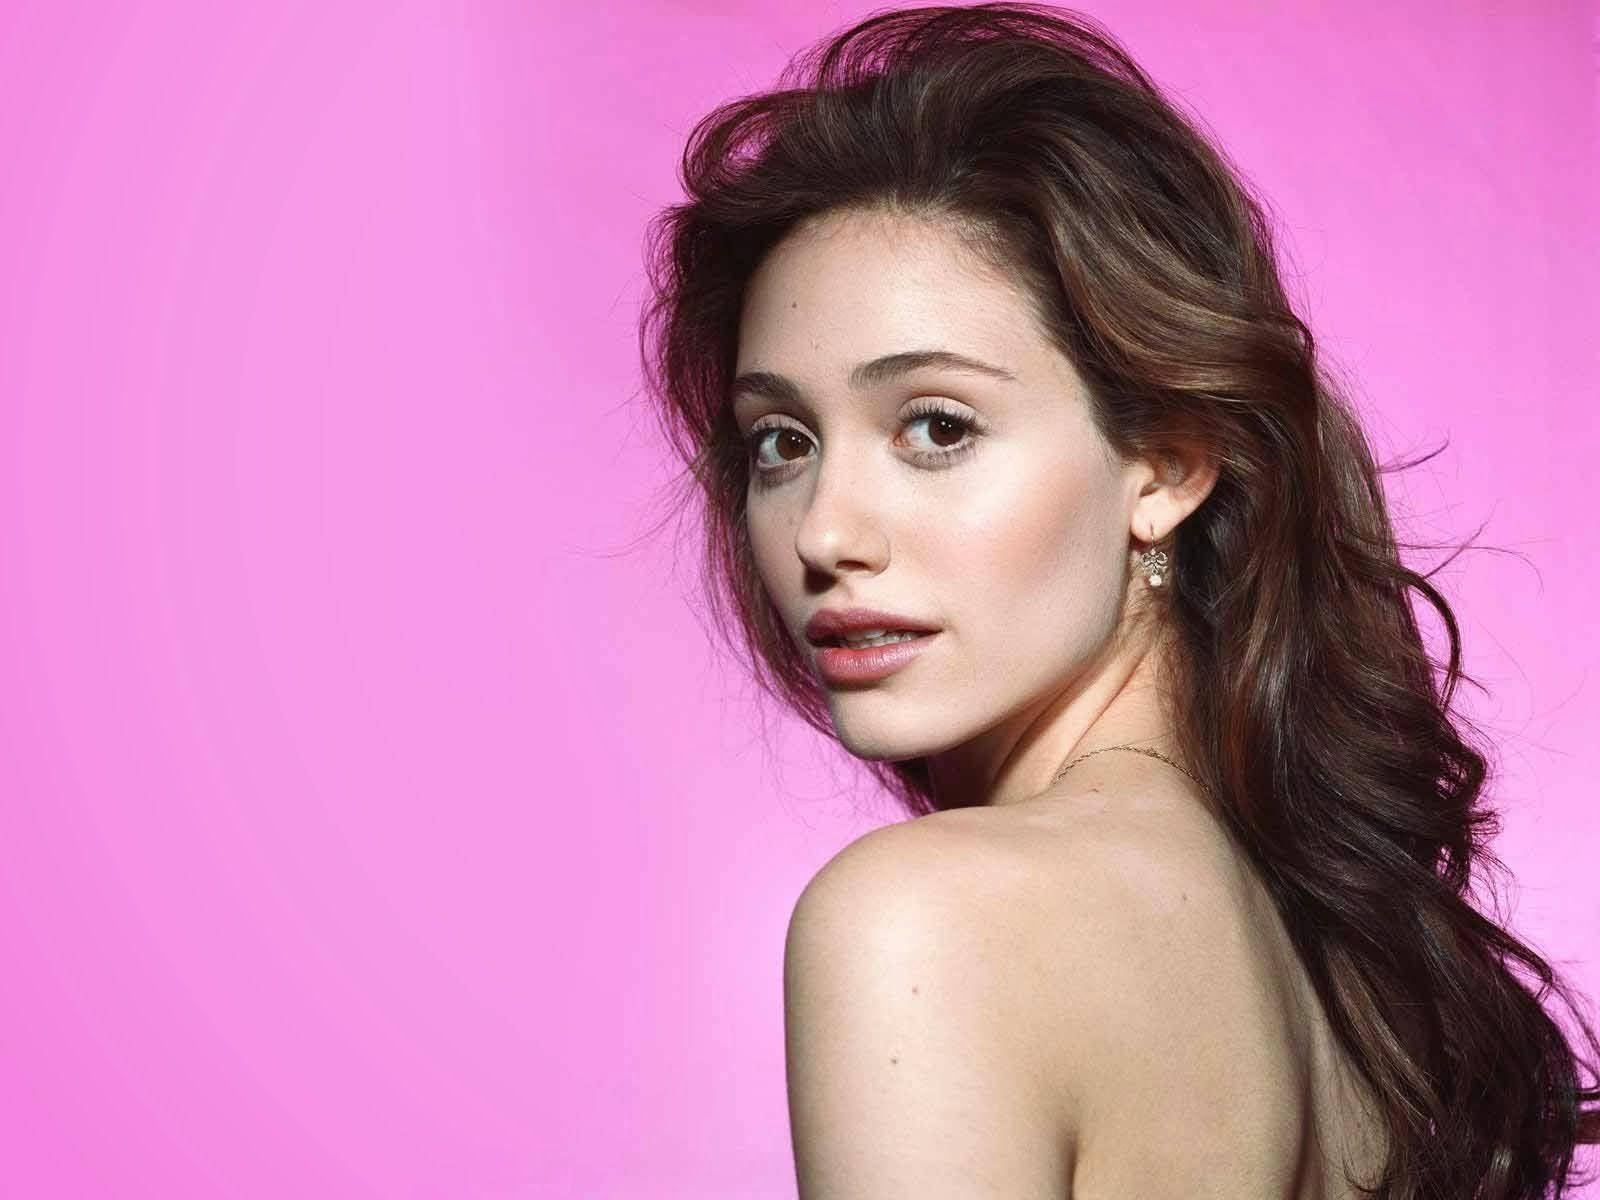 Emmy Rossum On Pink Picture